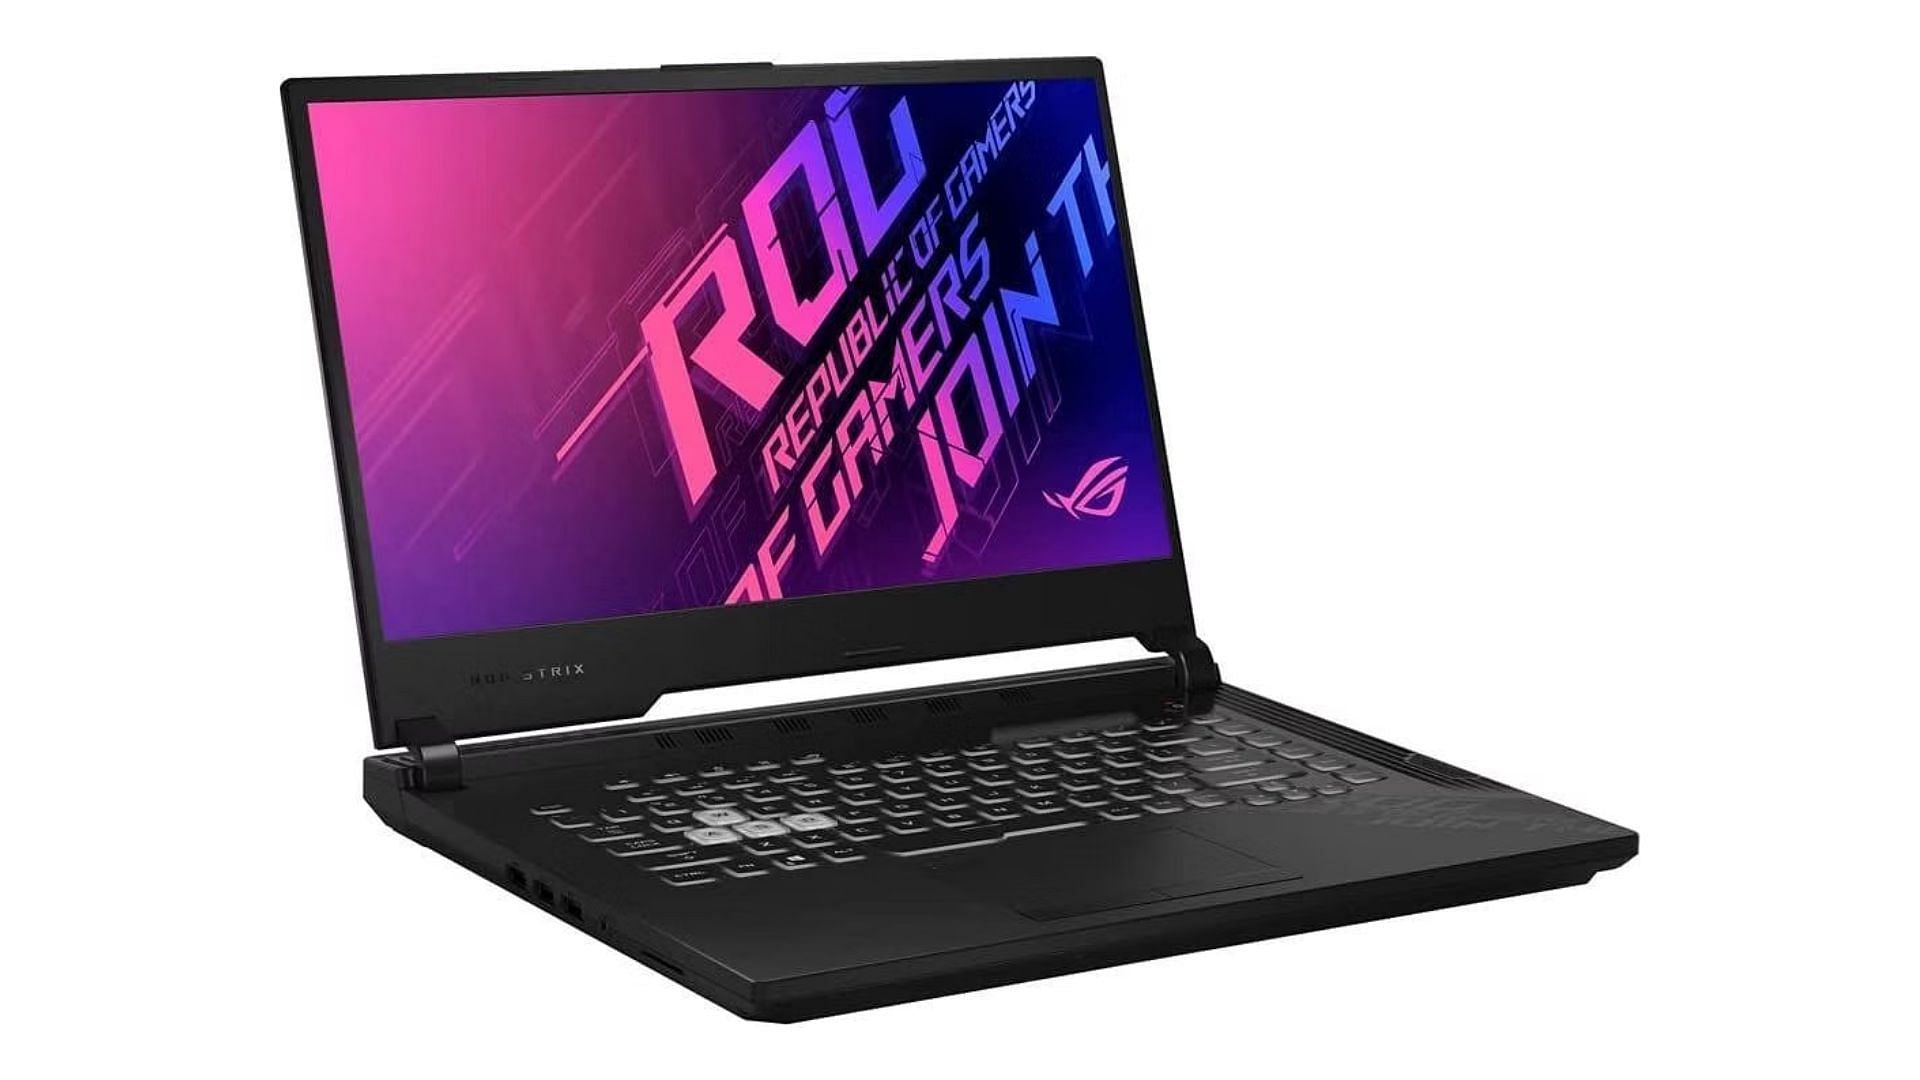 Despite being old, the RTX 2060 laptop GPU can run most games flawlessly (Image via Amazon)